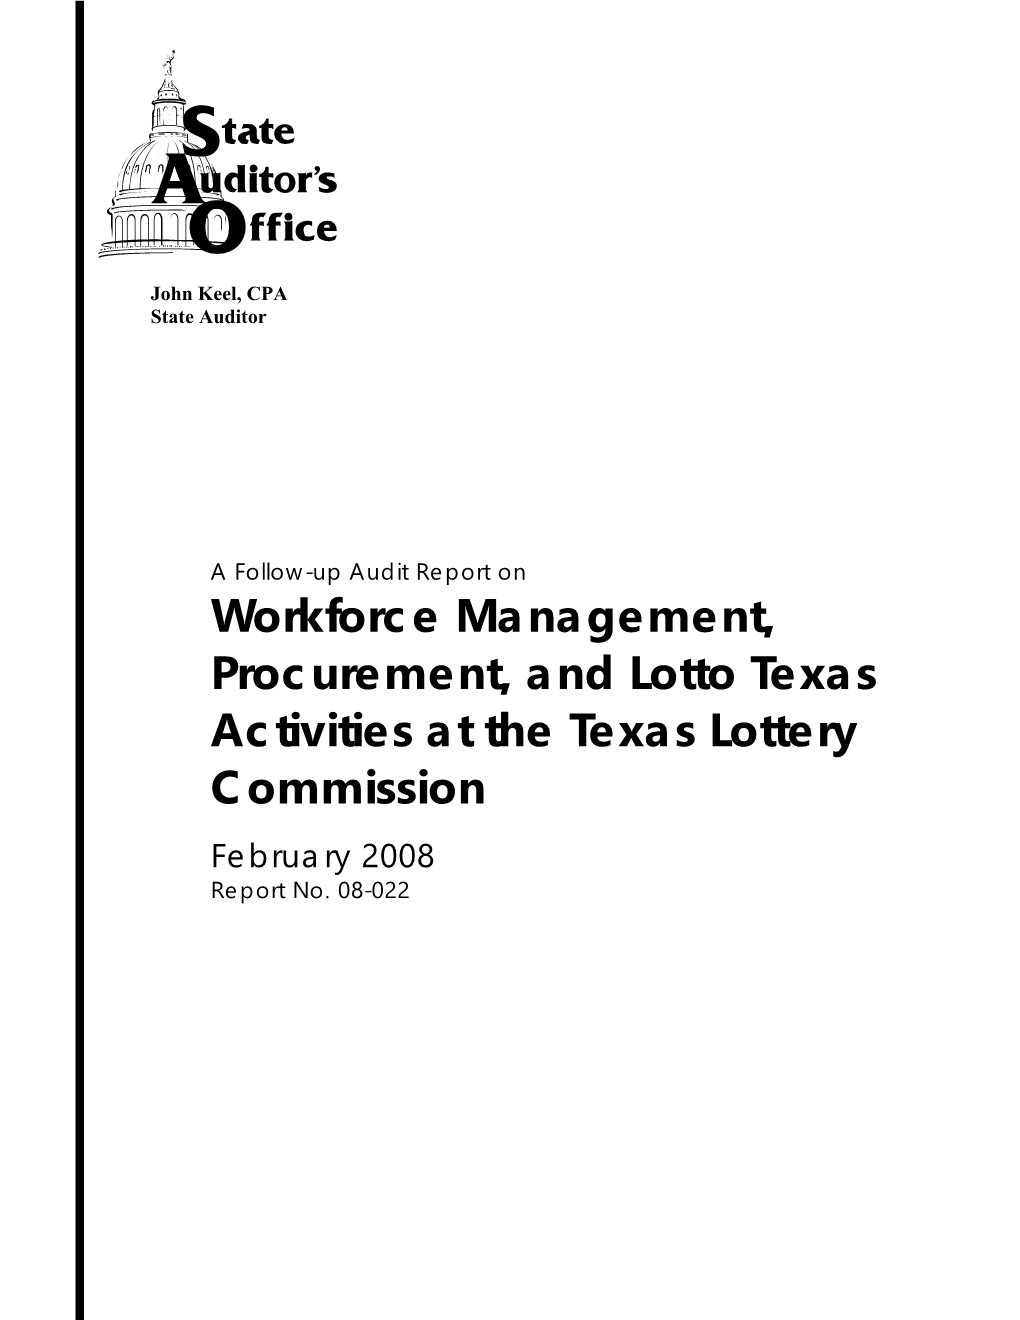 A Follow-Up Audit Report on Workforce Management, Procurement, and Lotto Texas Activities at the Texas Lottery Commission February 2008 Report No